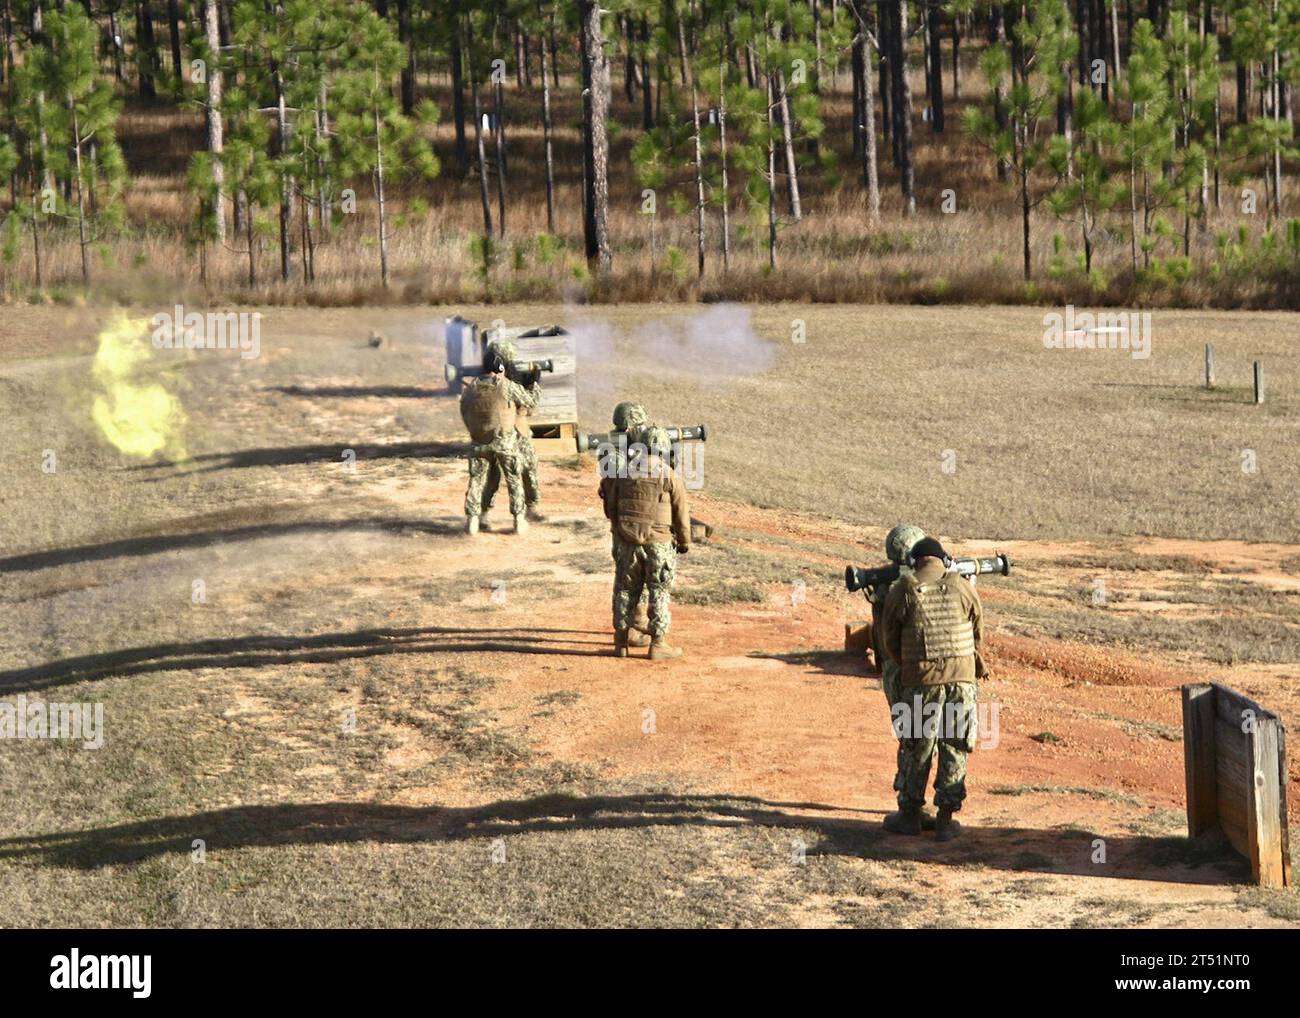 120113ZZ999-003 CAMP SHELBY, Miss (Jan. 13, 2012) Seabees assigned to Naval Mobile Construction Battalion (NMCB) 74 participate in a live-fire exercise with the AT-4 anti-tank rocket launcher during a weapons training exercise. The AT-4 is a shoulder-launched lightweight anti-armor weapon. (U.S. Navy Stock Photo